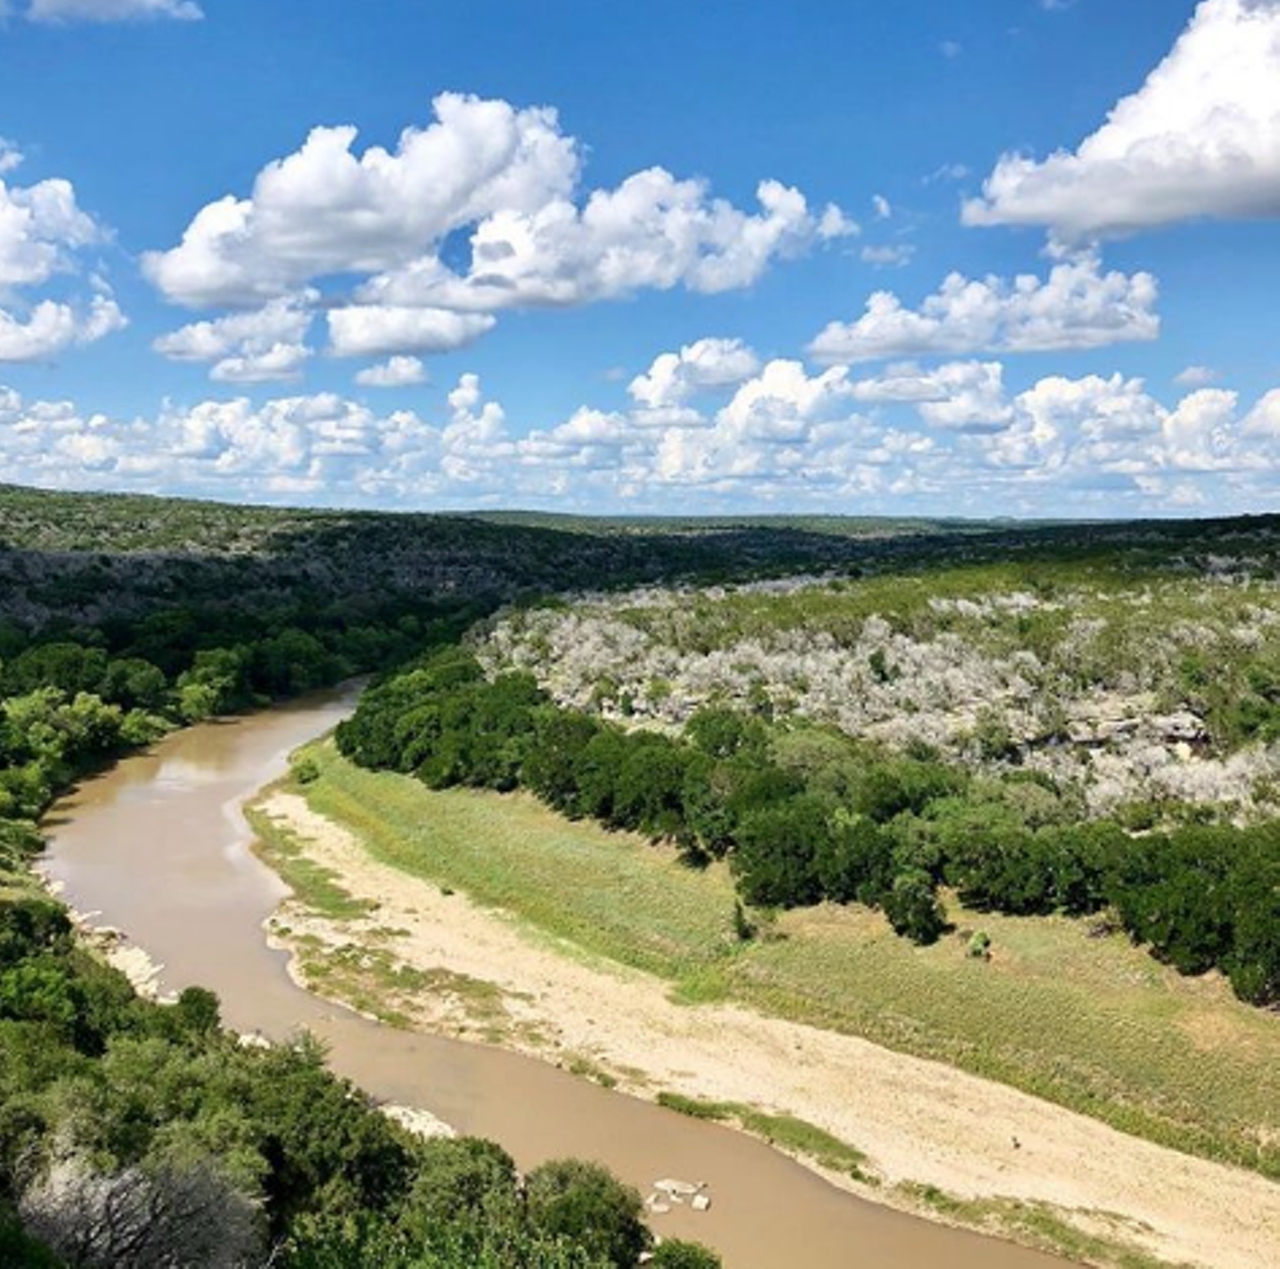 Colorado Bend State Park
2236 Park Hill Drive, Bend, (325) 628-3240, tpwd.texas.gov
Colorado Bend State Park offers a large population of white bass, a feature that has given the park the reputation of being one of the best locations to bass fish in Central Texas. The park does not require a fishing license and offers a fish cleaning station.
Photo via Instagram / danielthedoggo11